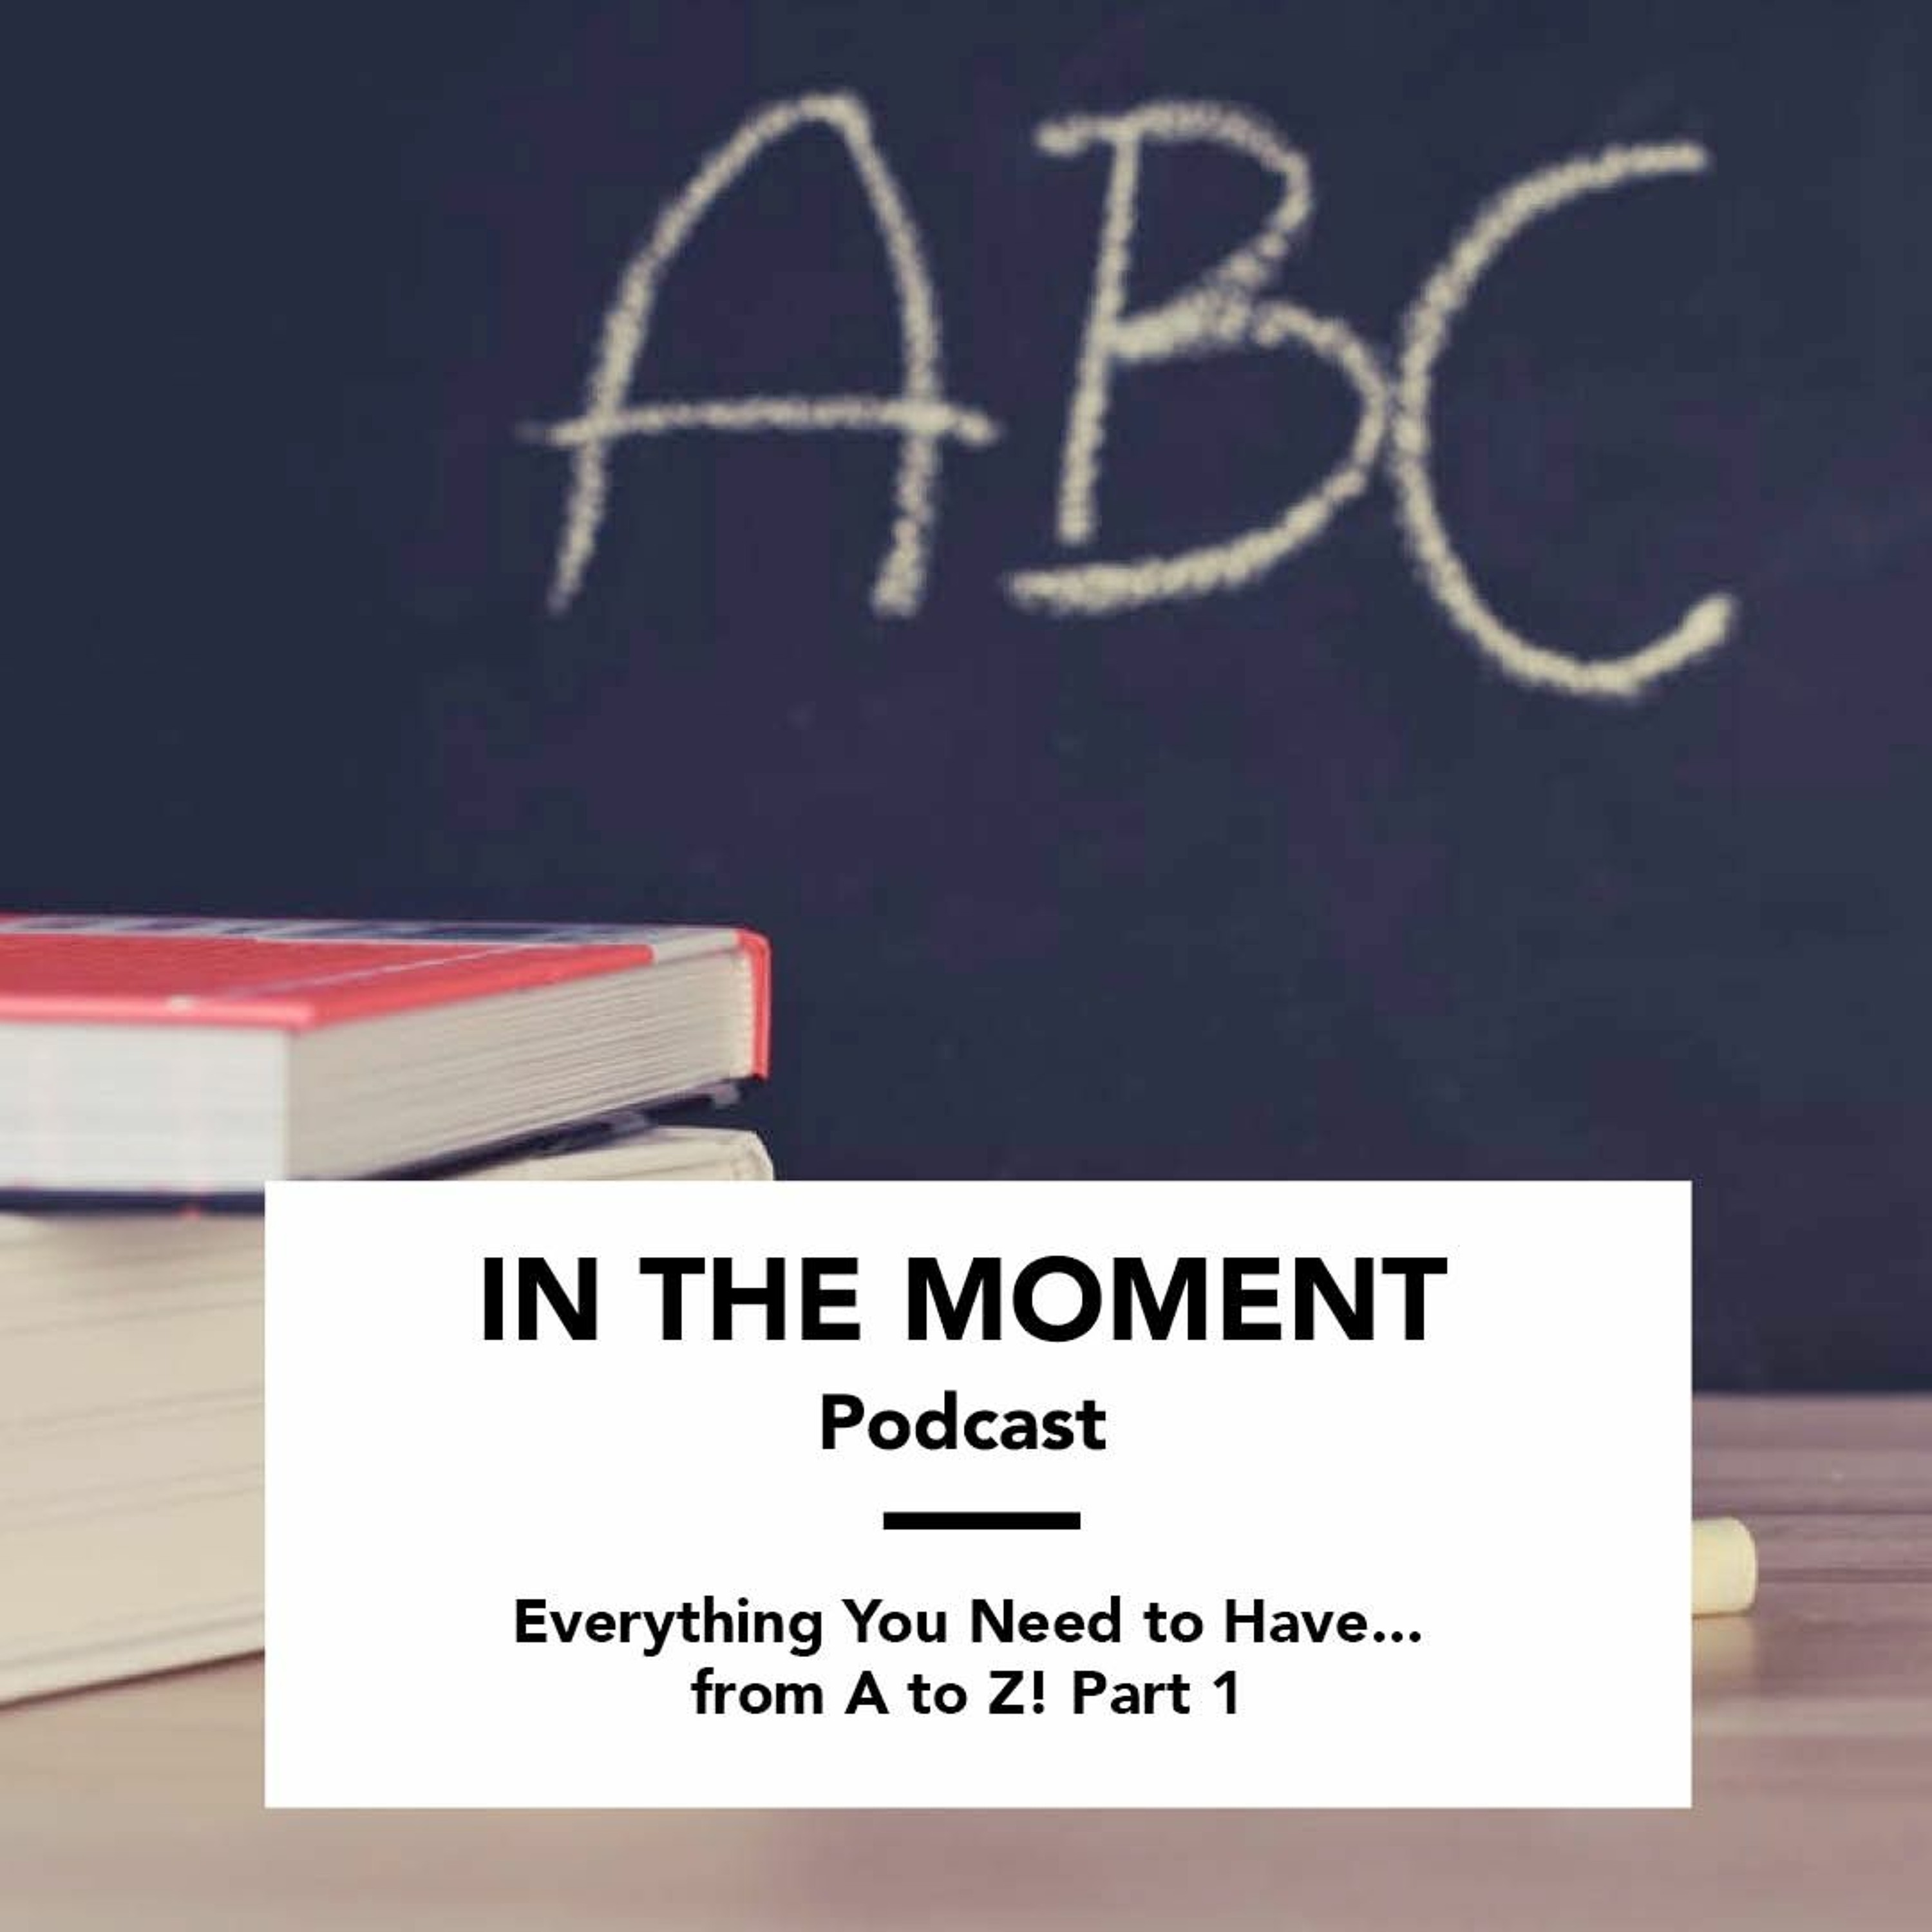 Everything You Need to Have... from A to Z! Part 1